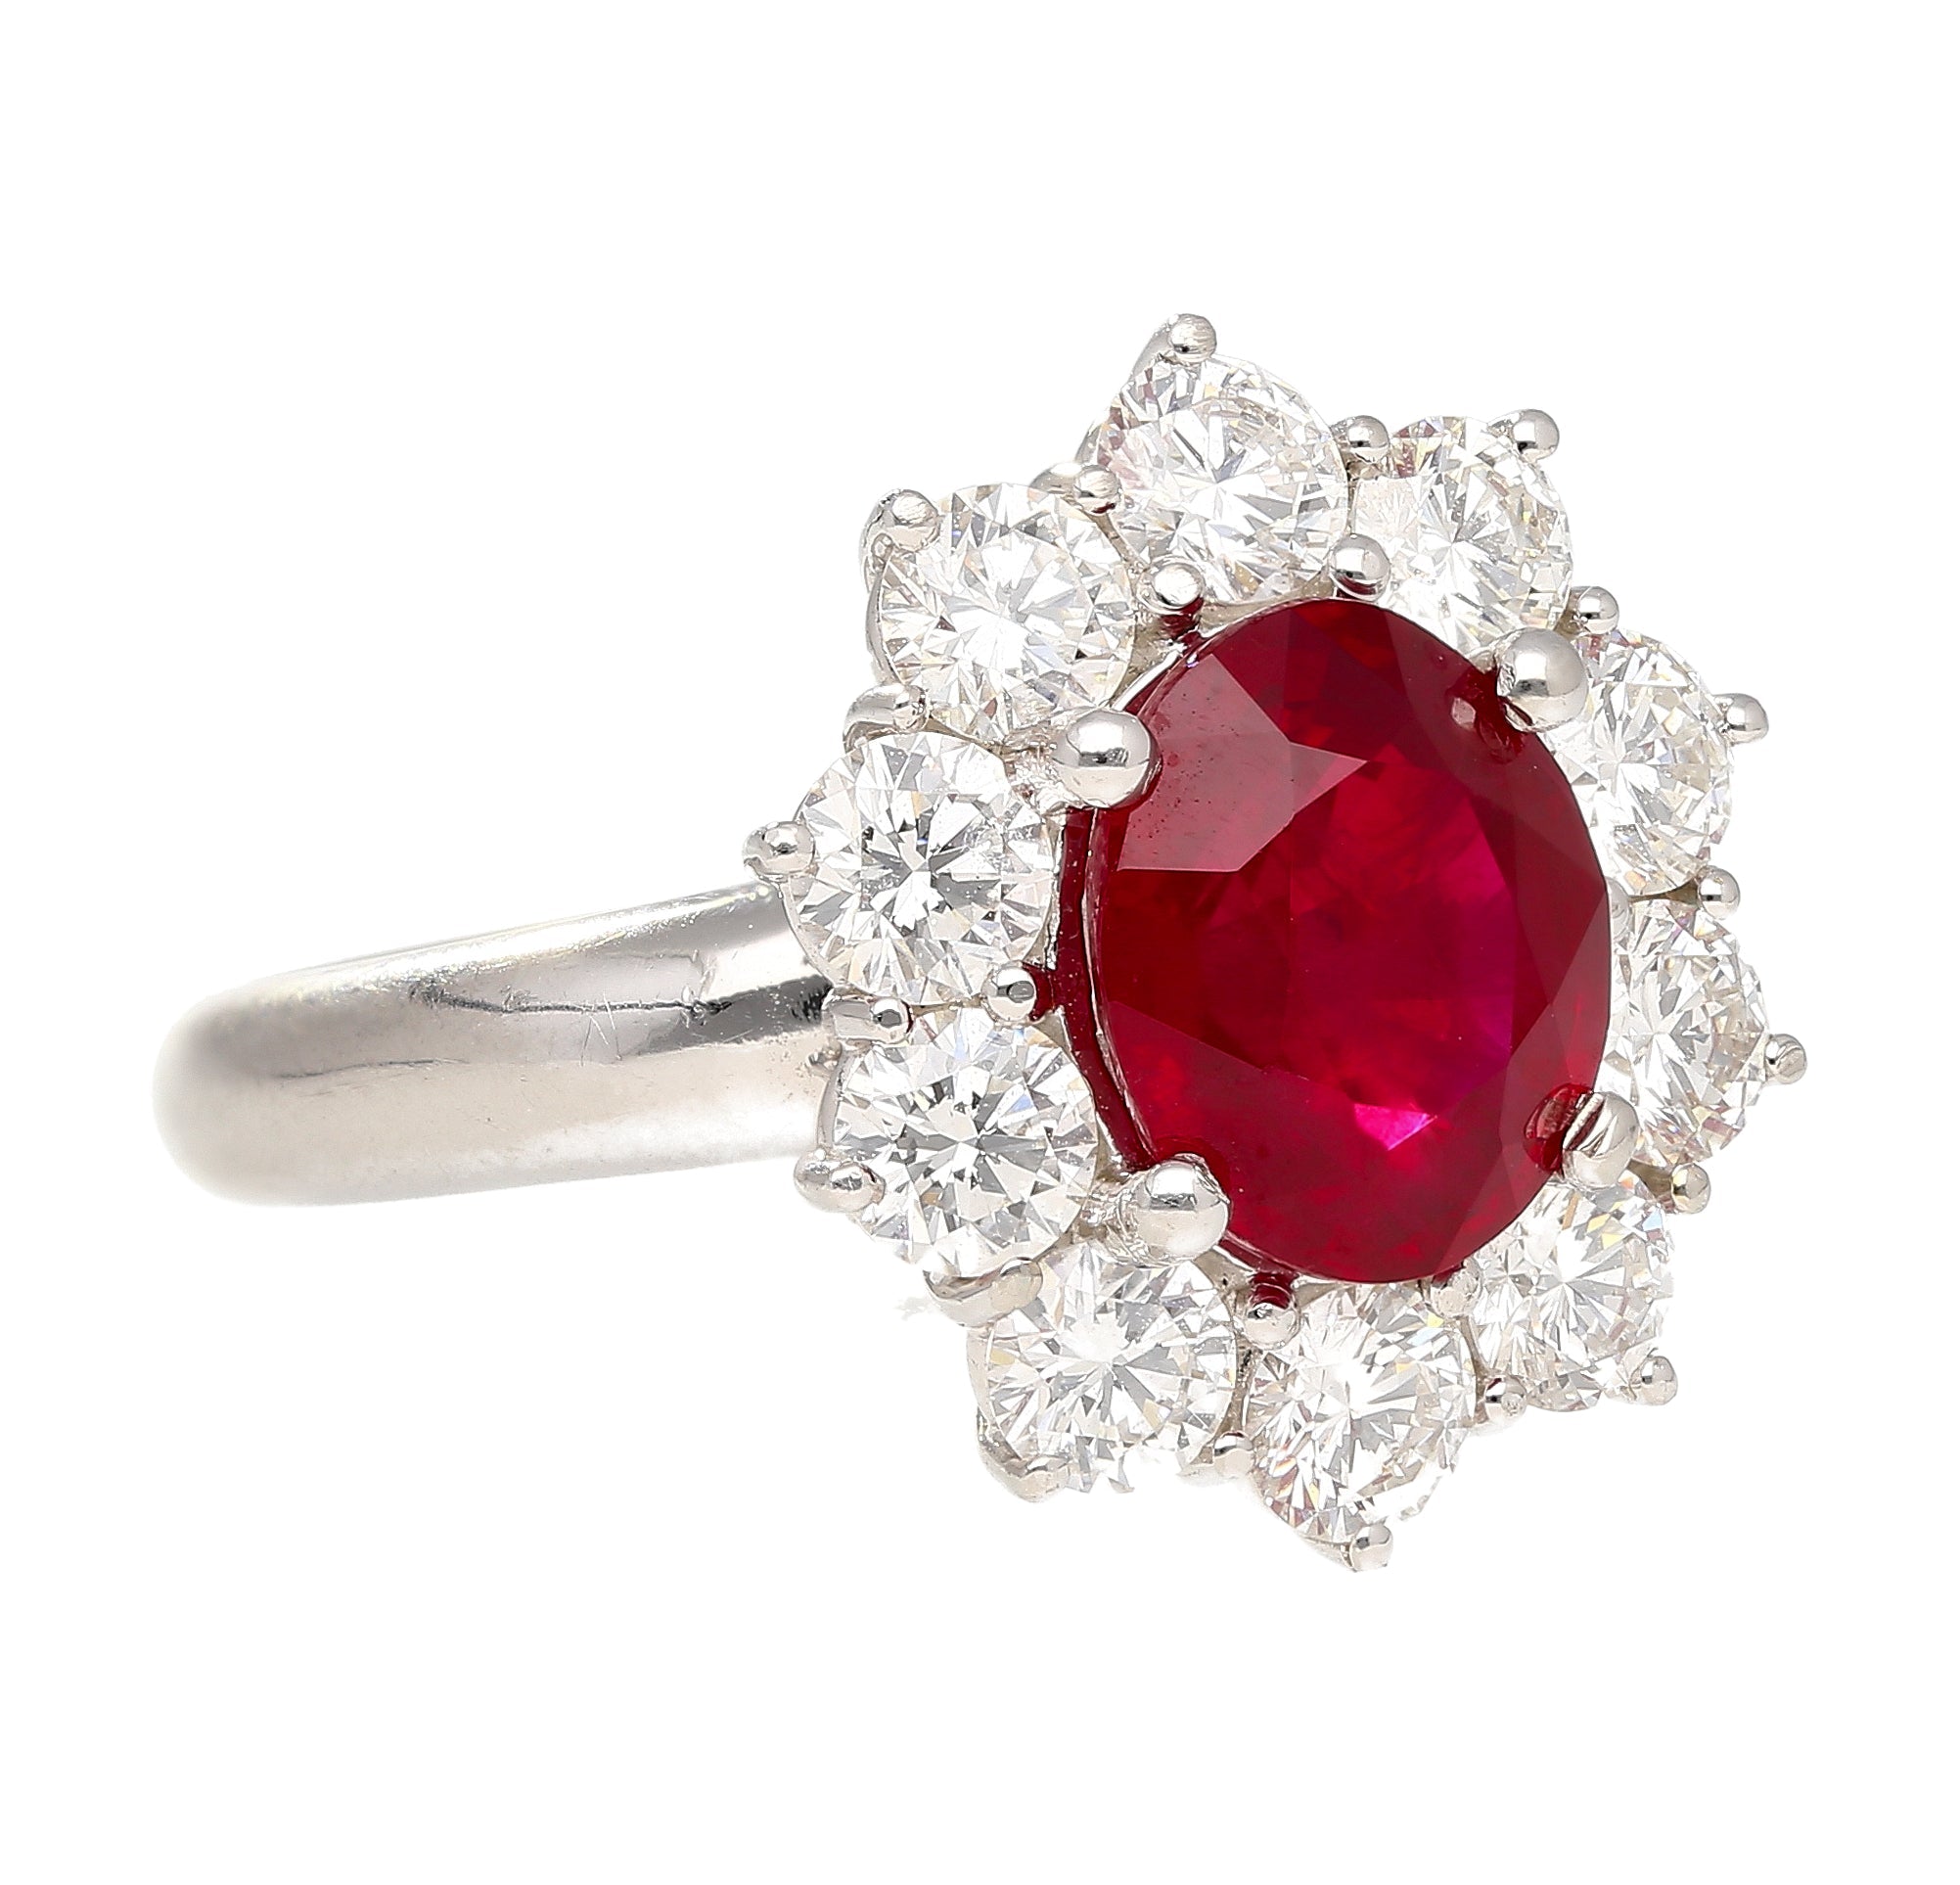 GRS-Certified-3-carat-Vivid-Red-Pigeon-Blood-Oval-Cut-Burma-Ruby-Ring-with-Diamond-Halo-Rings-2.jpg